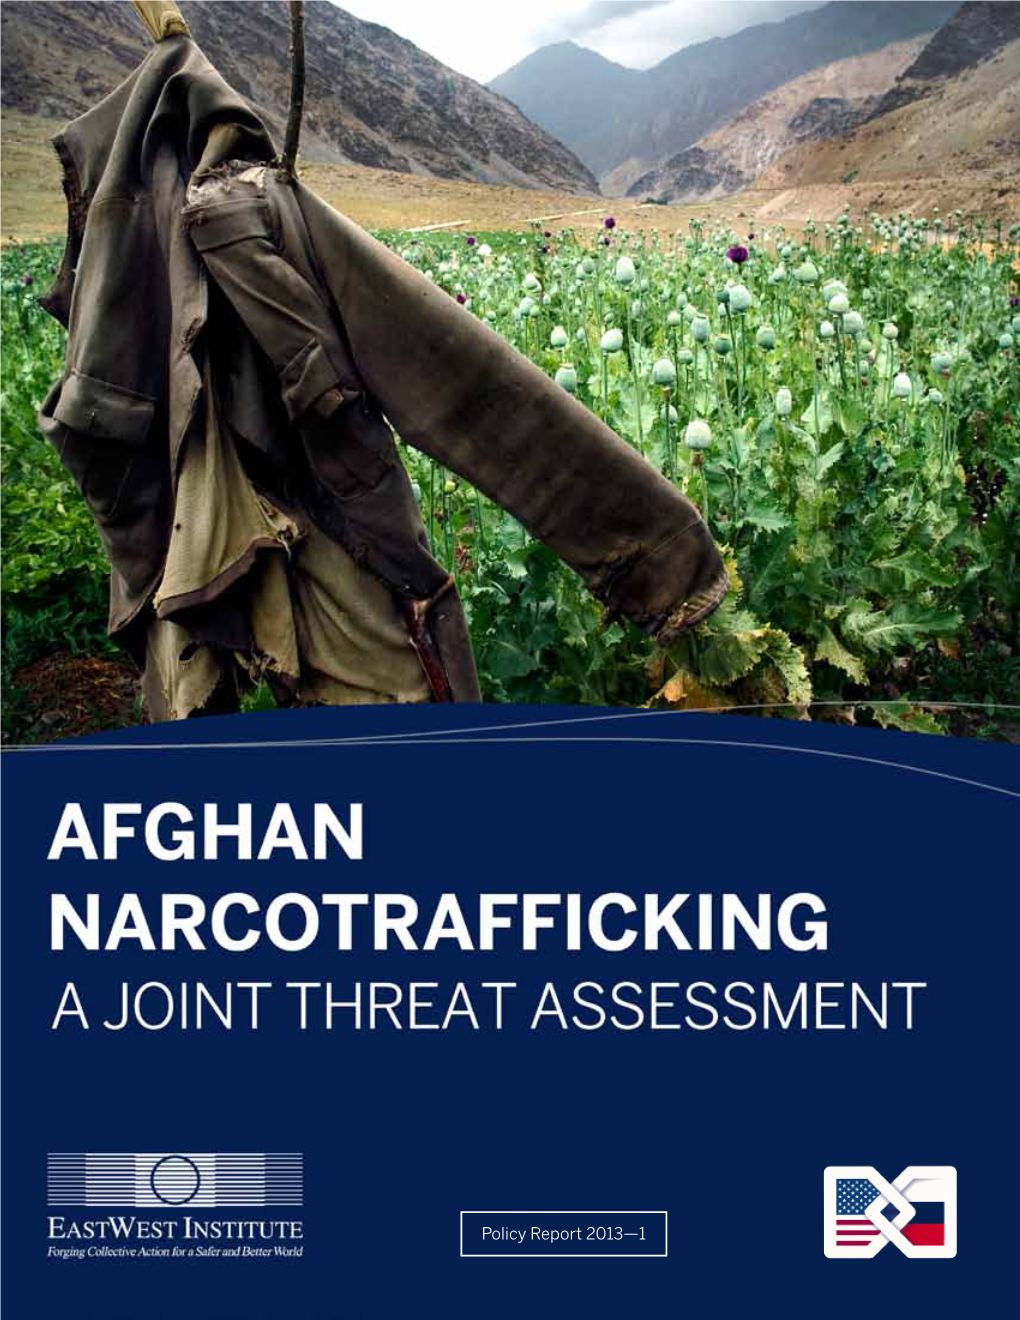 Afghan Narcotrafficking a Joint Threat Assessment